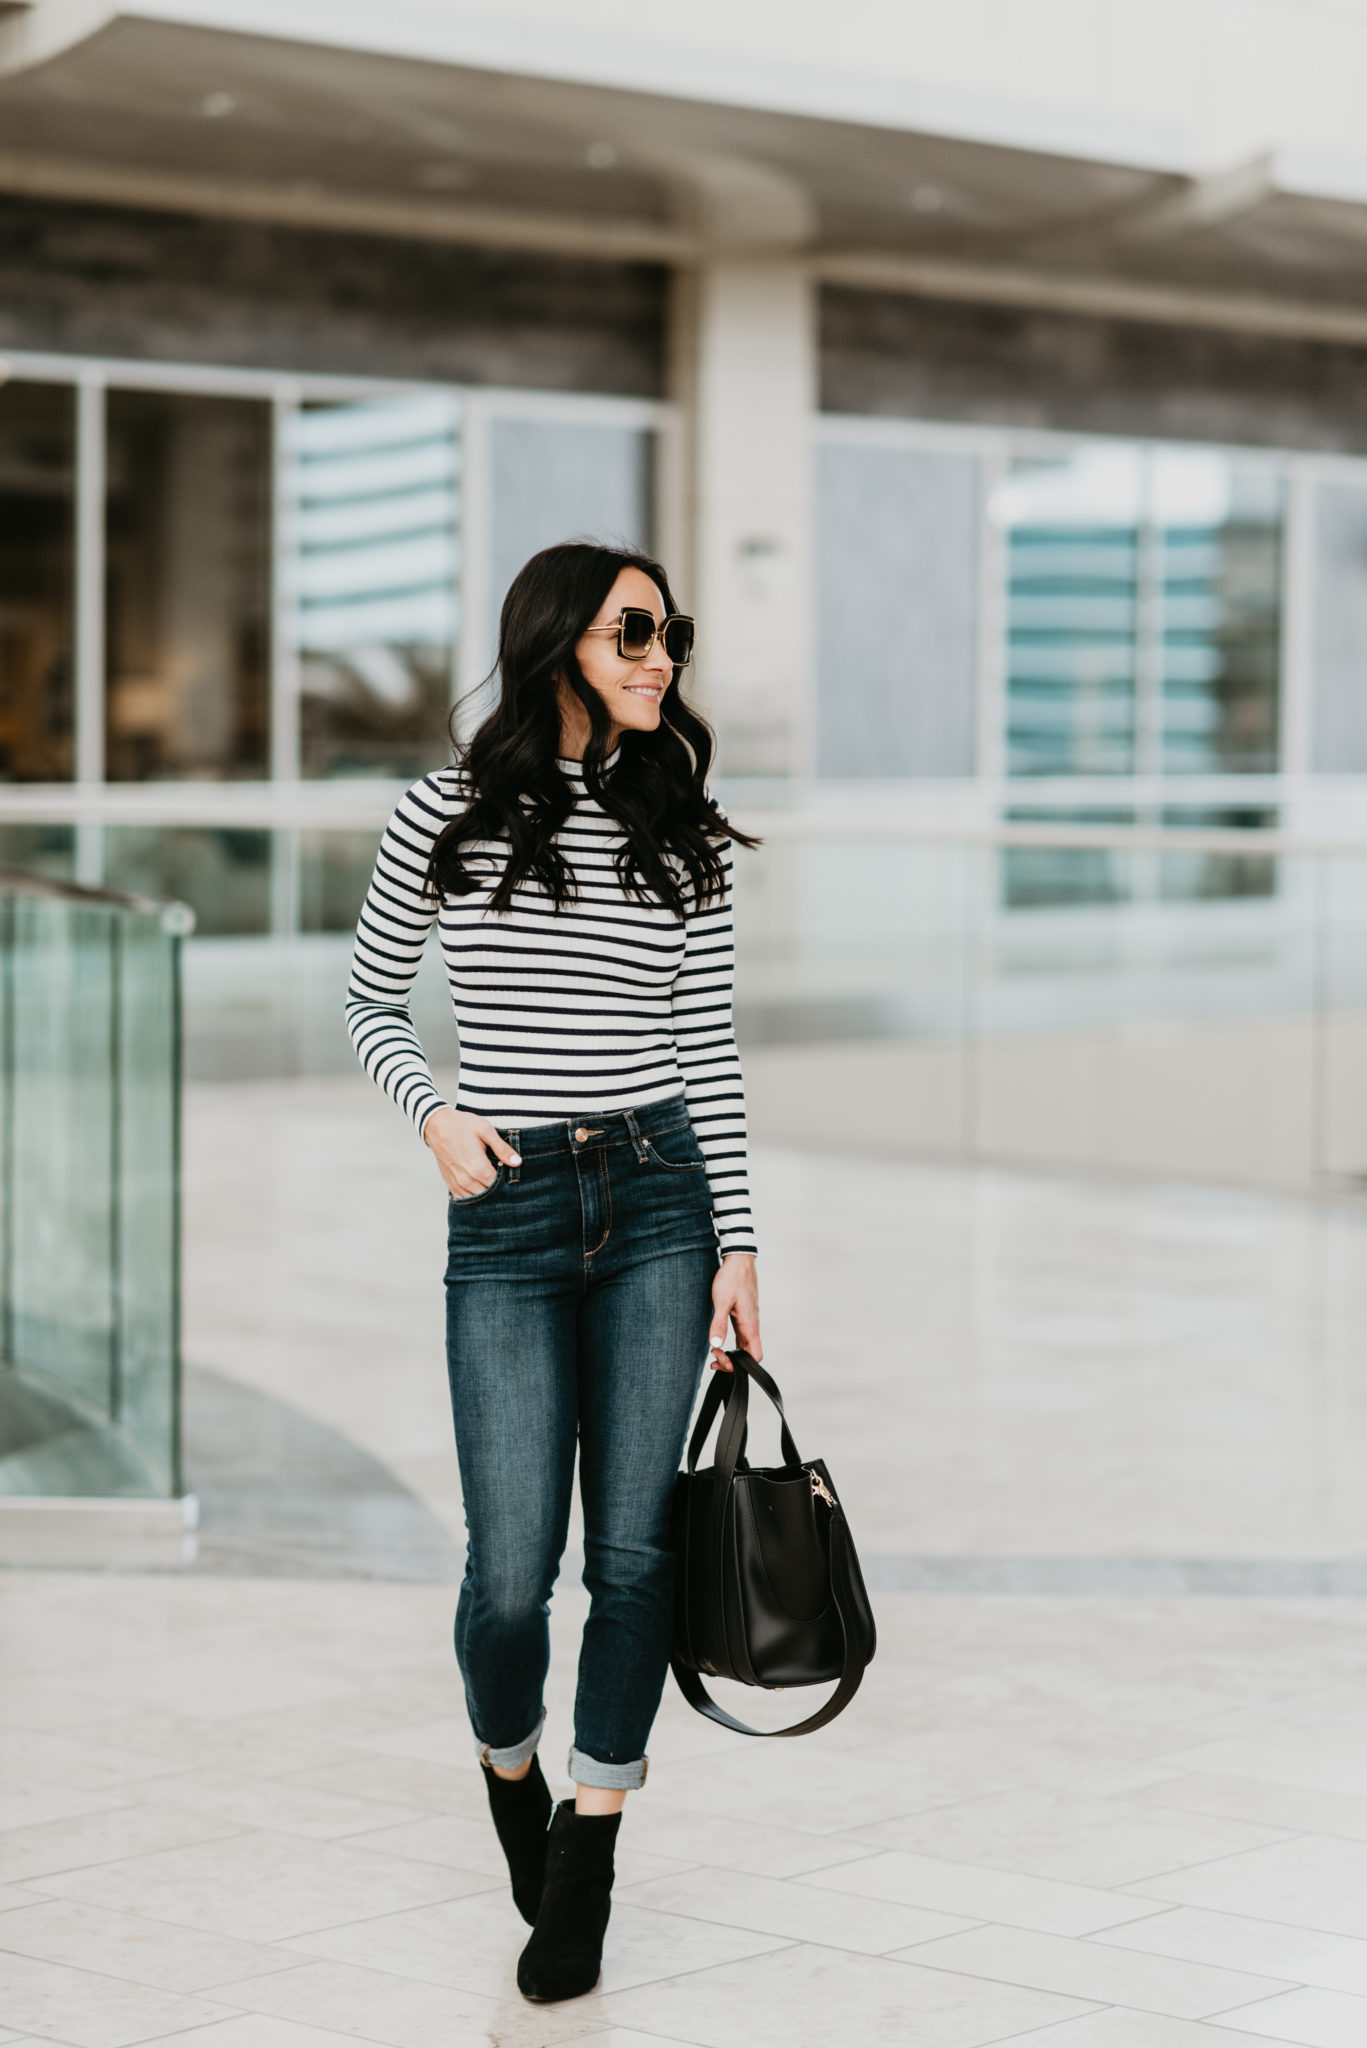 The Perfect Casual Winter Outfit | Outfits & Outings